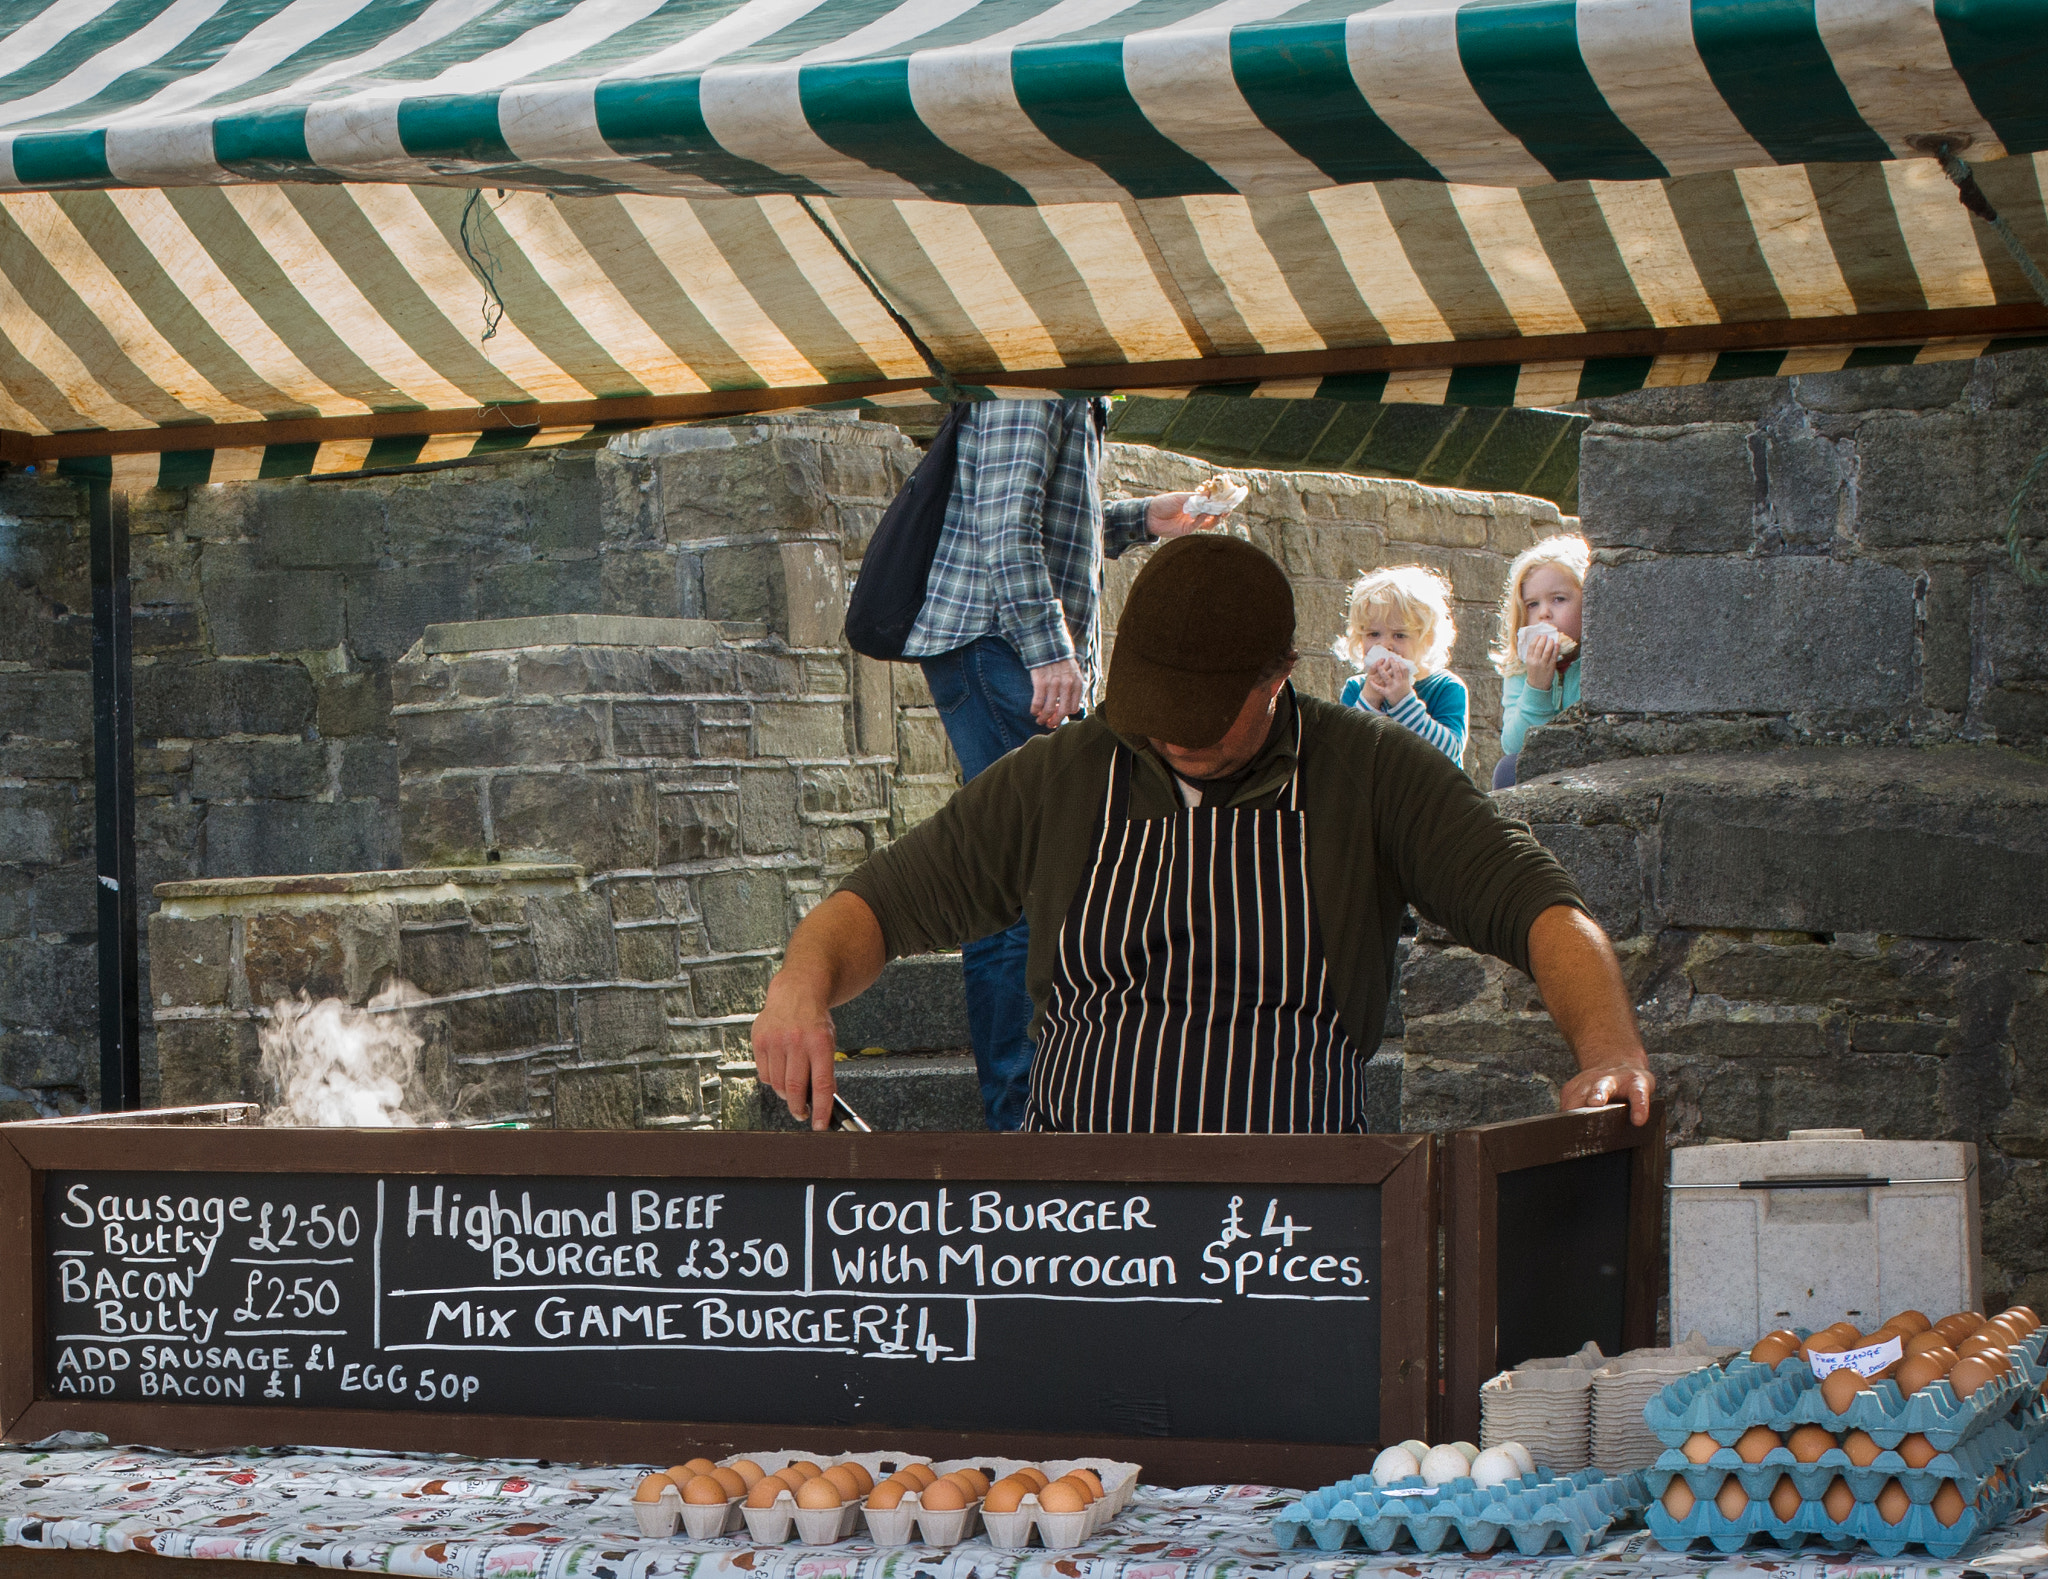 Nikon D800 sample photo. Yorkshire butty stand photography